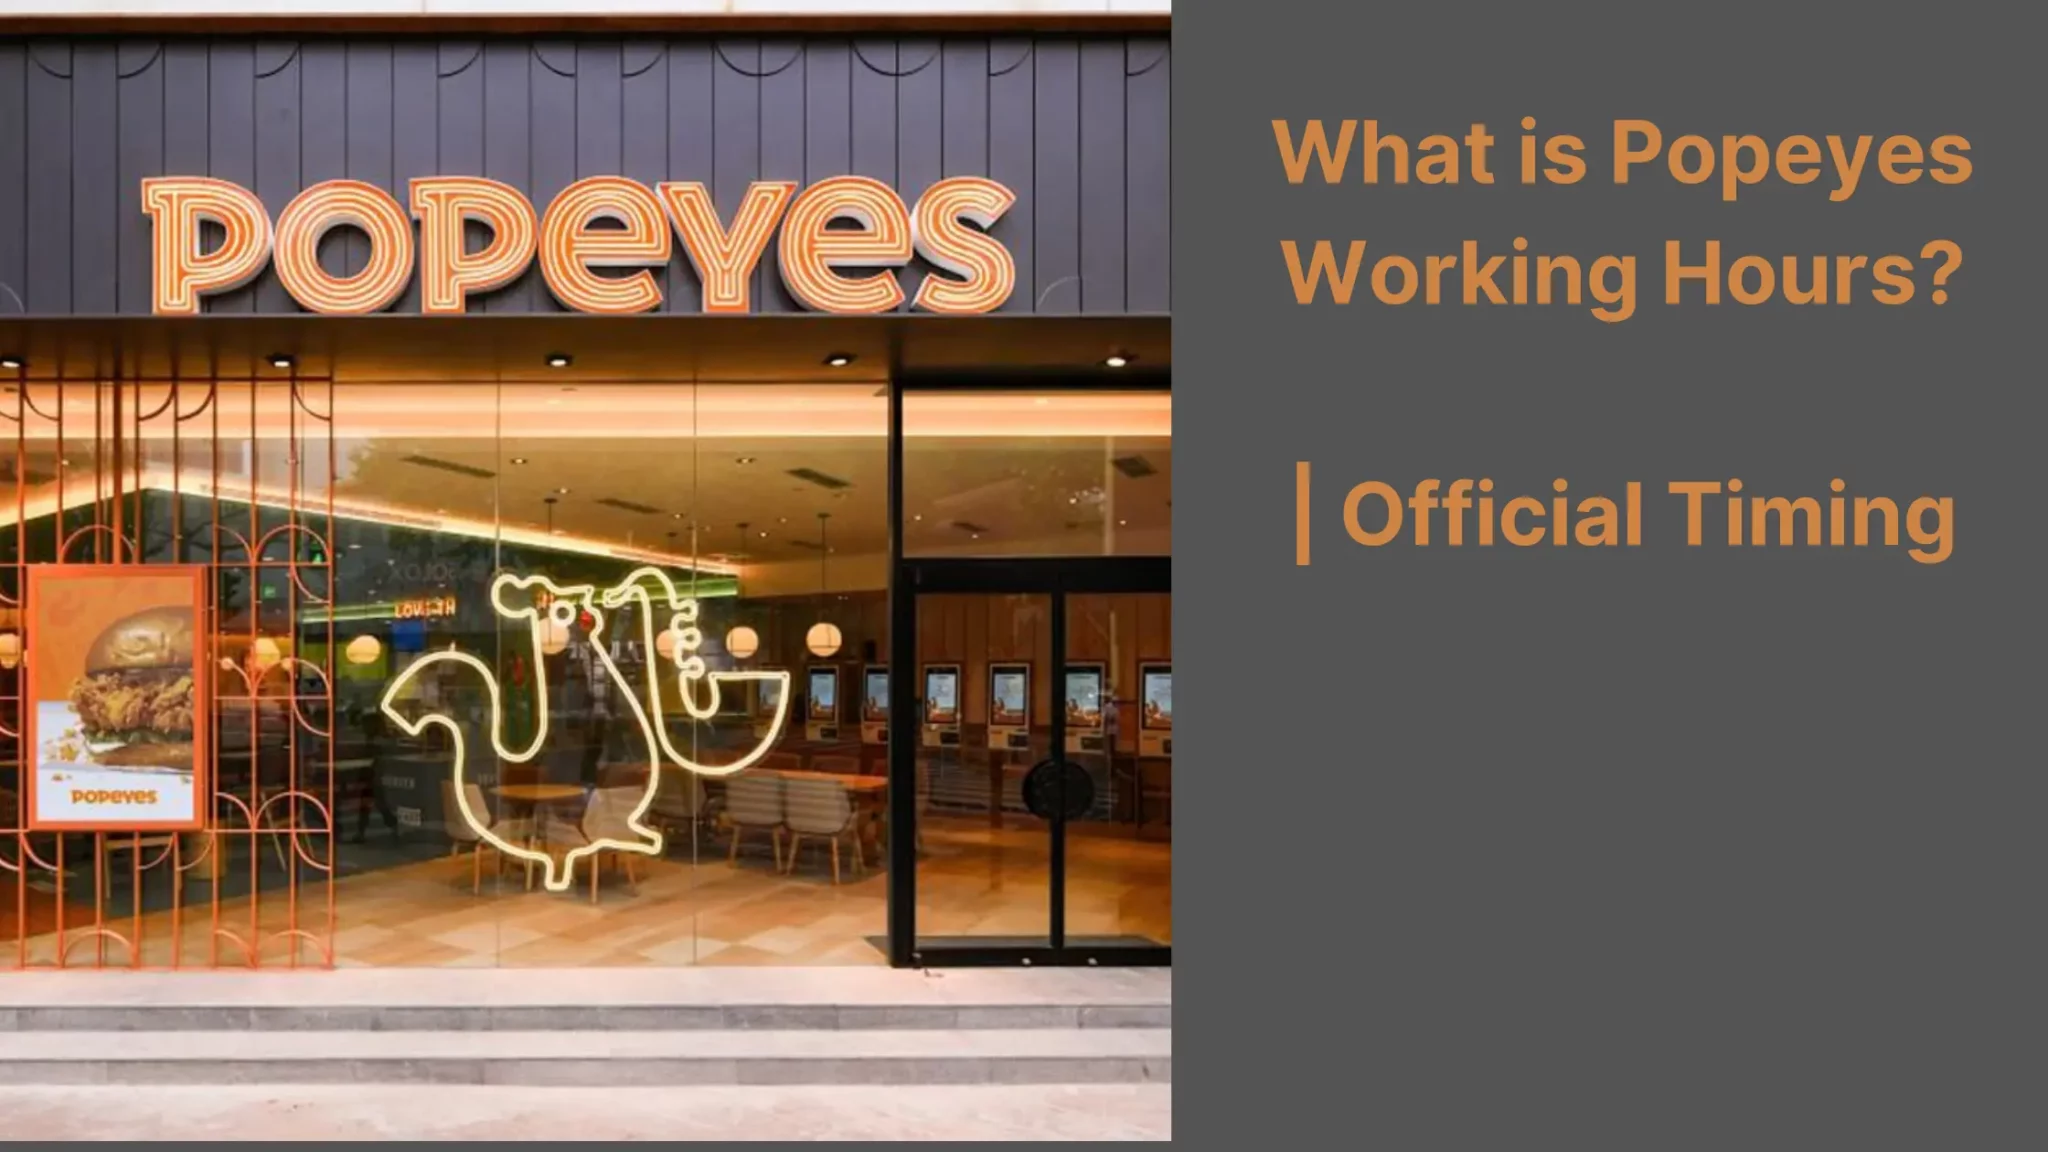 What is Popeyes Working Hours?